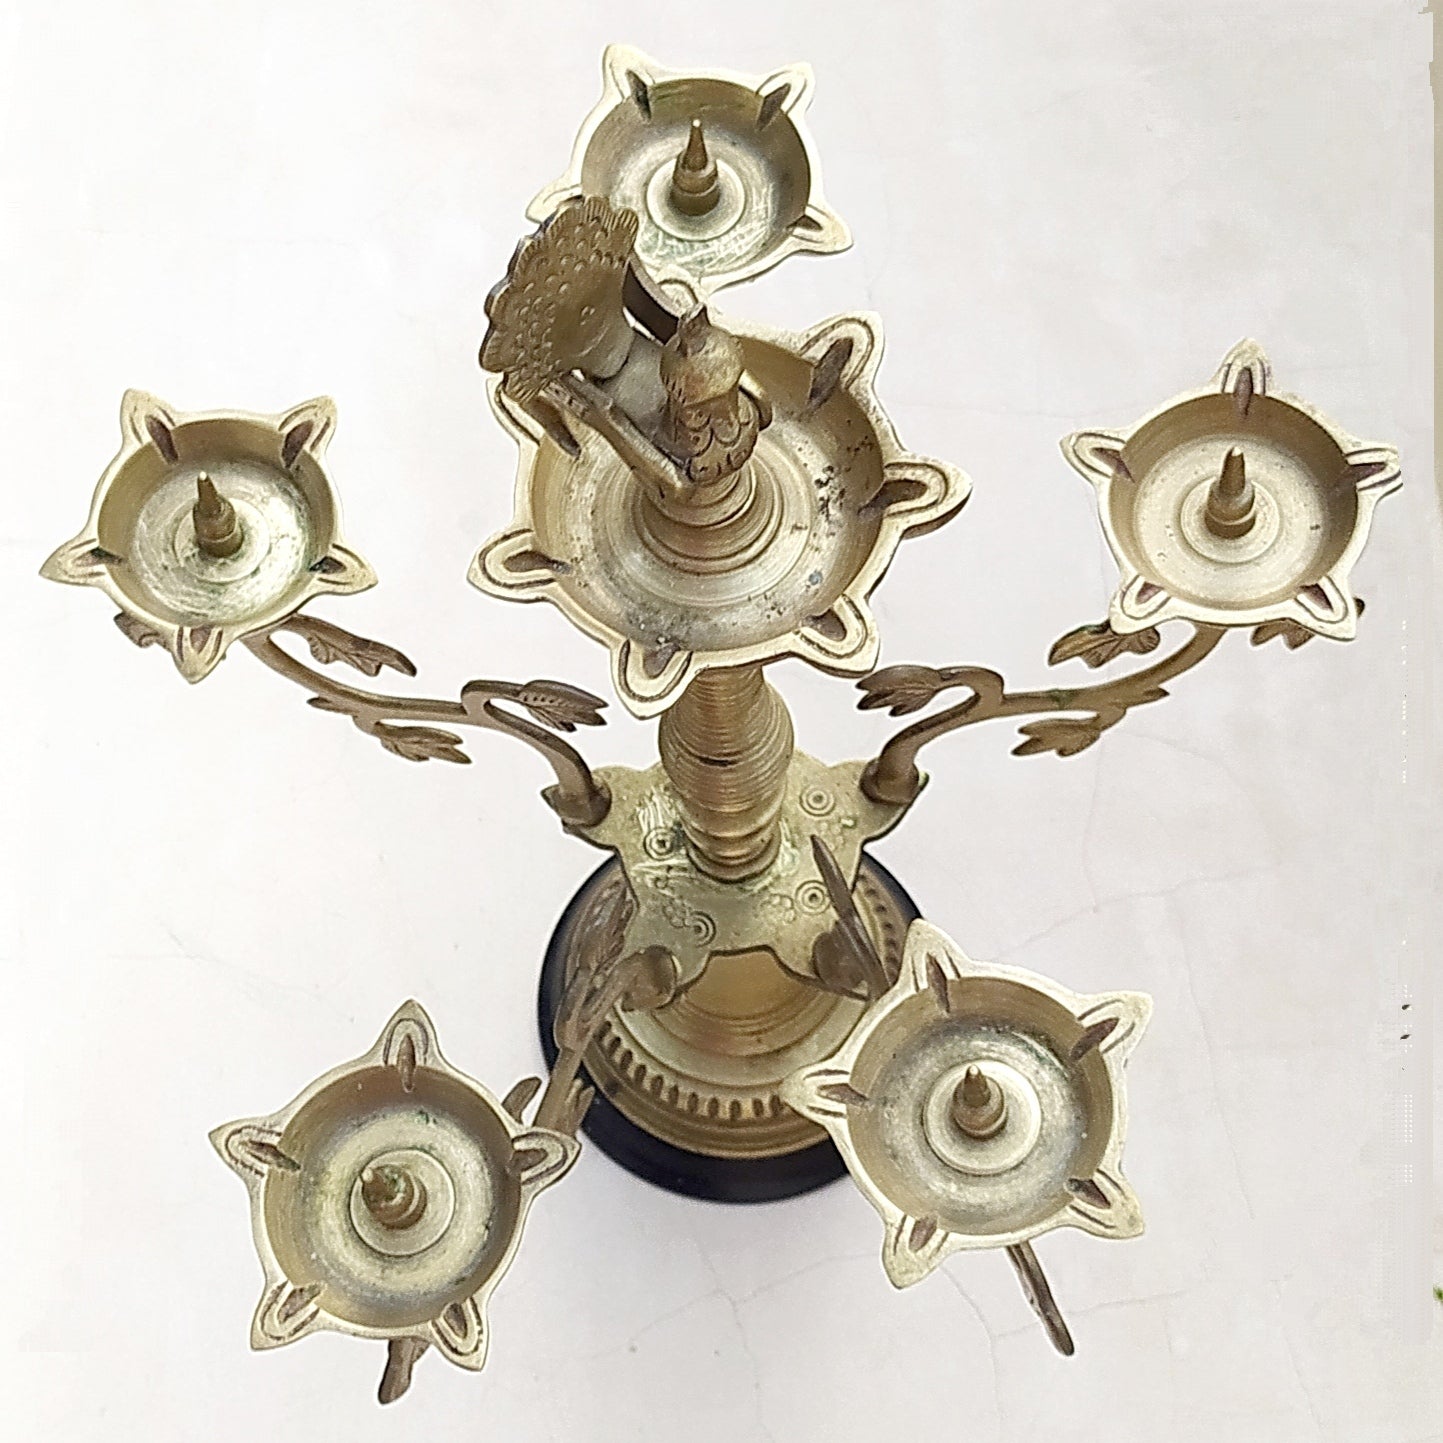 Exquisite Brass Oil Lamp With 5 Diyas Handcrafted With The Mythical Hamsa -  Ht 30 cm